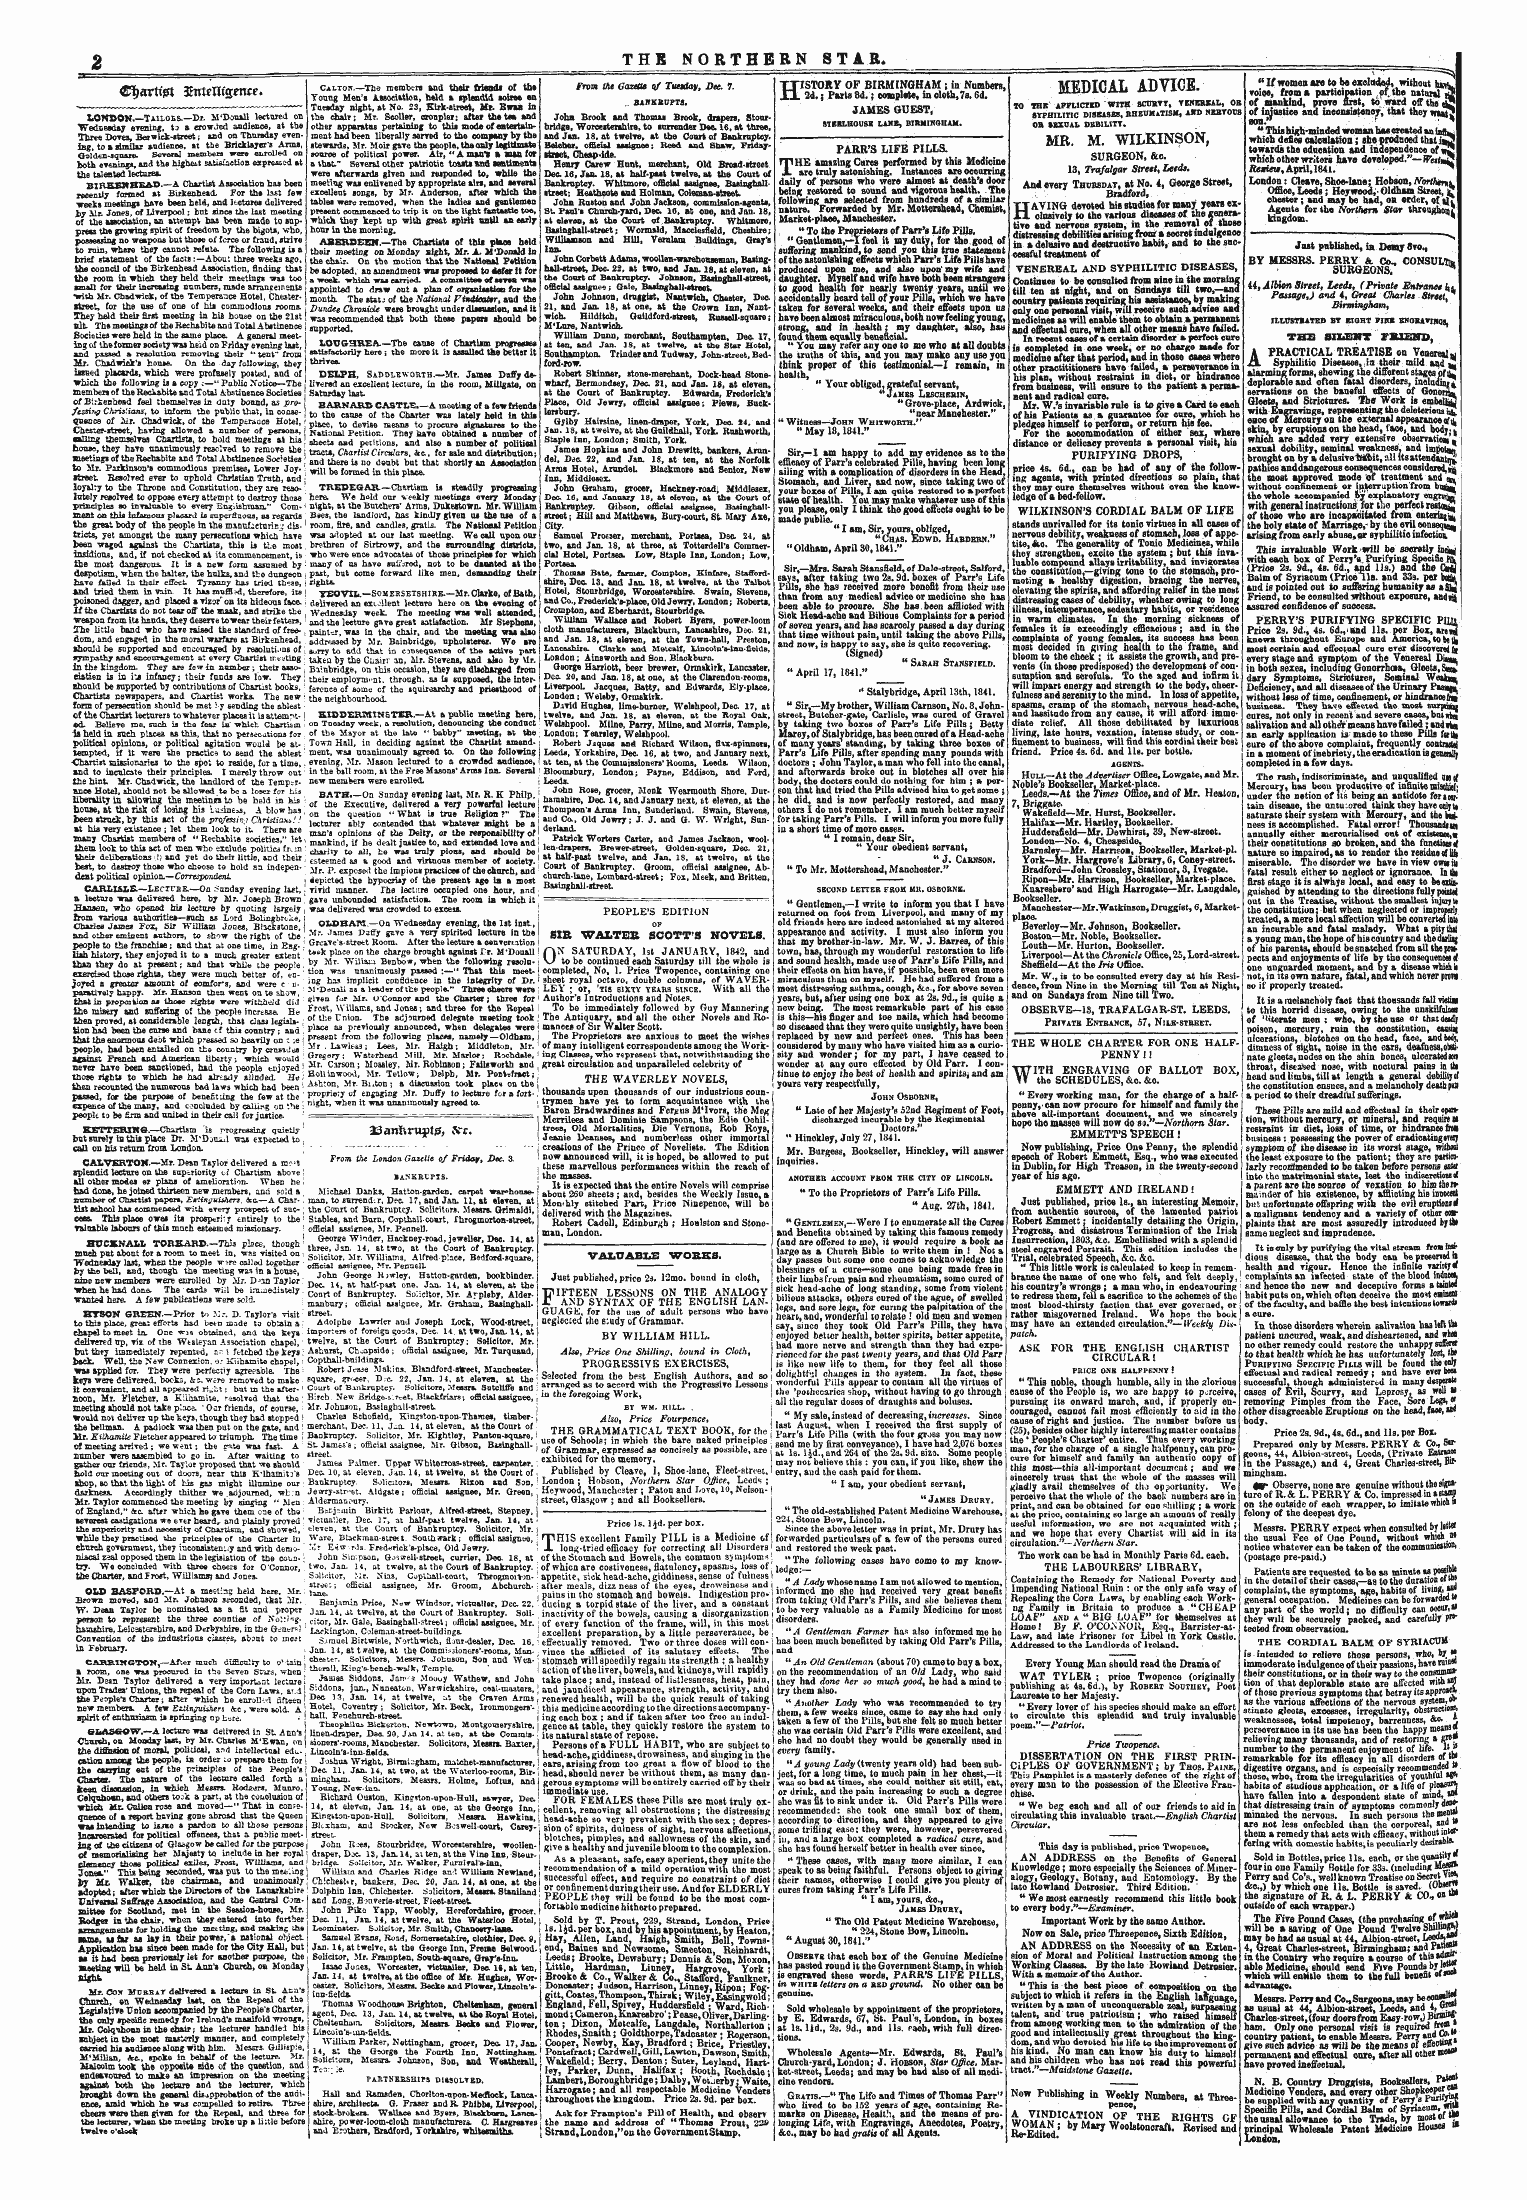 Northern Star (1837-1852): jS F Y, 4th edition - From The Gazette Of Tuetday, Dec 7